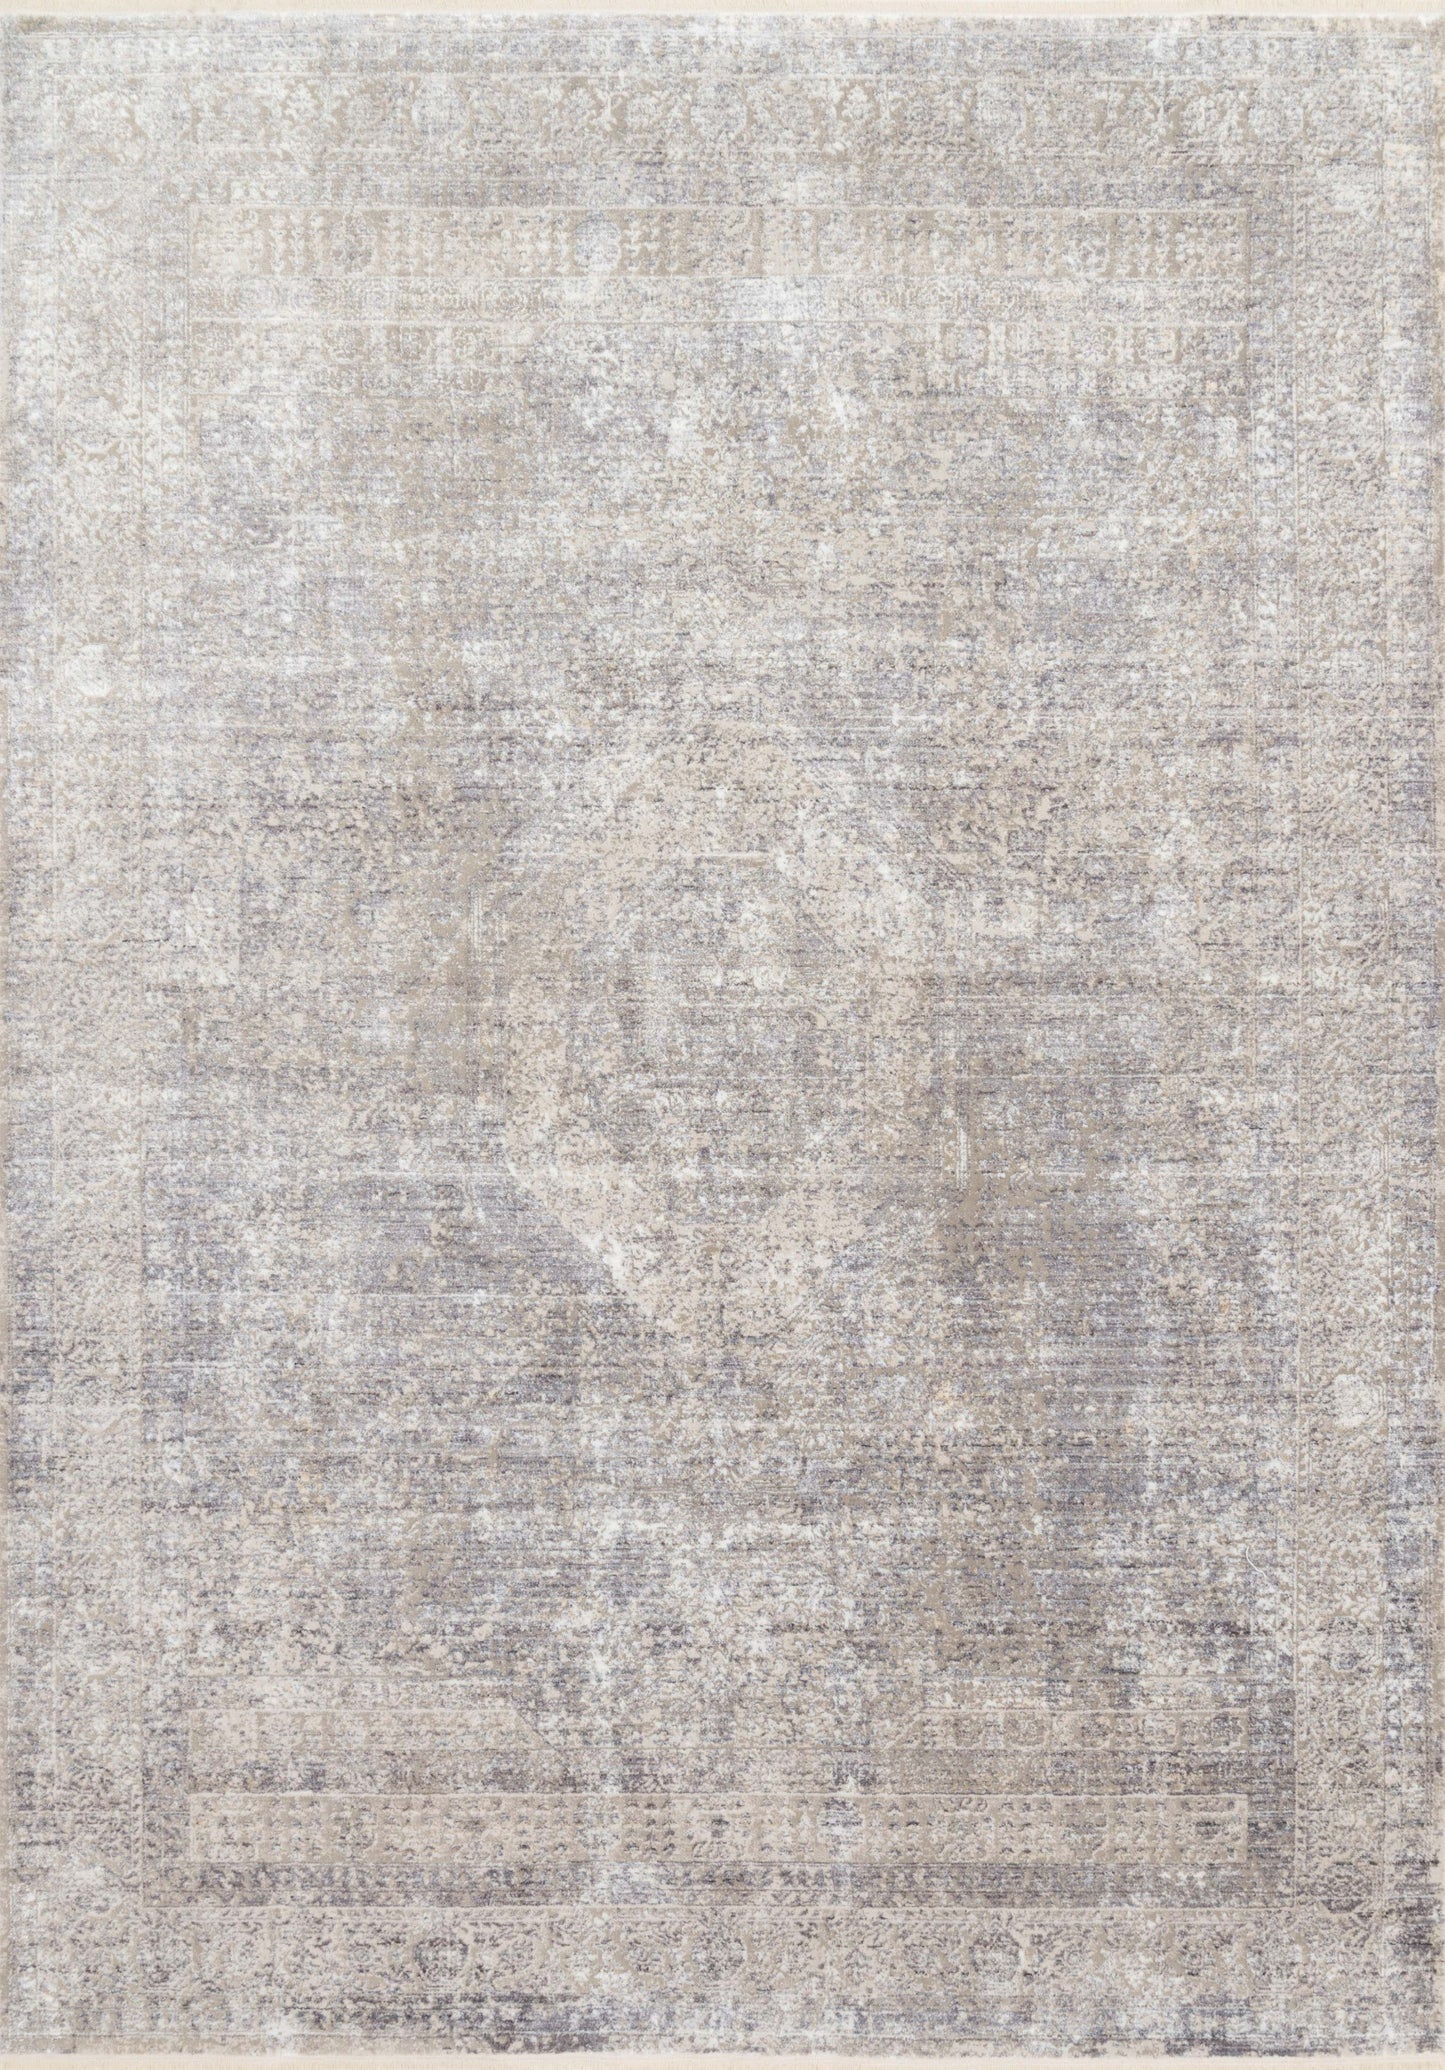 A picture of Loloi's Franca rug, in style FRN-01, color Silver / Pebble